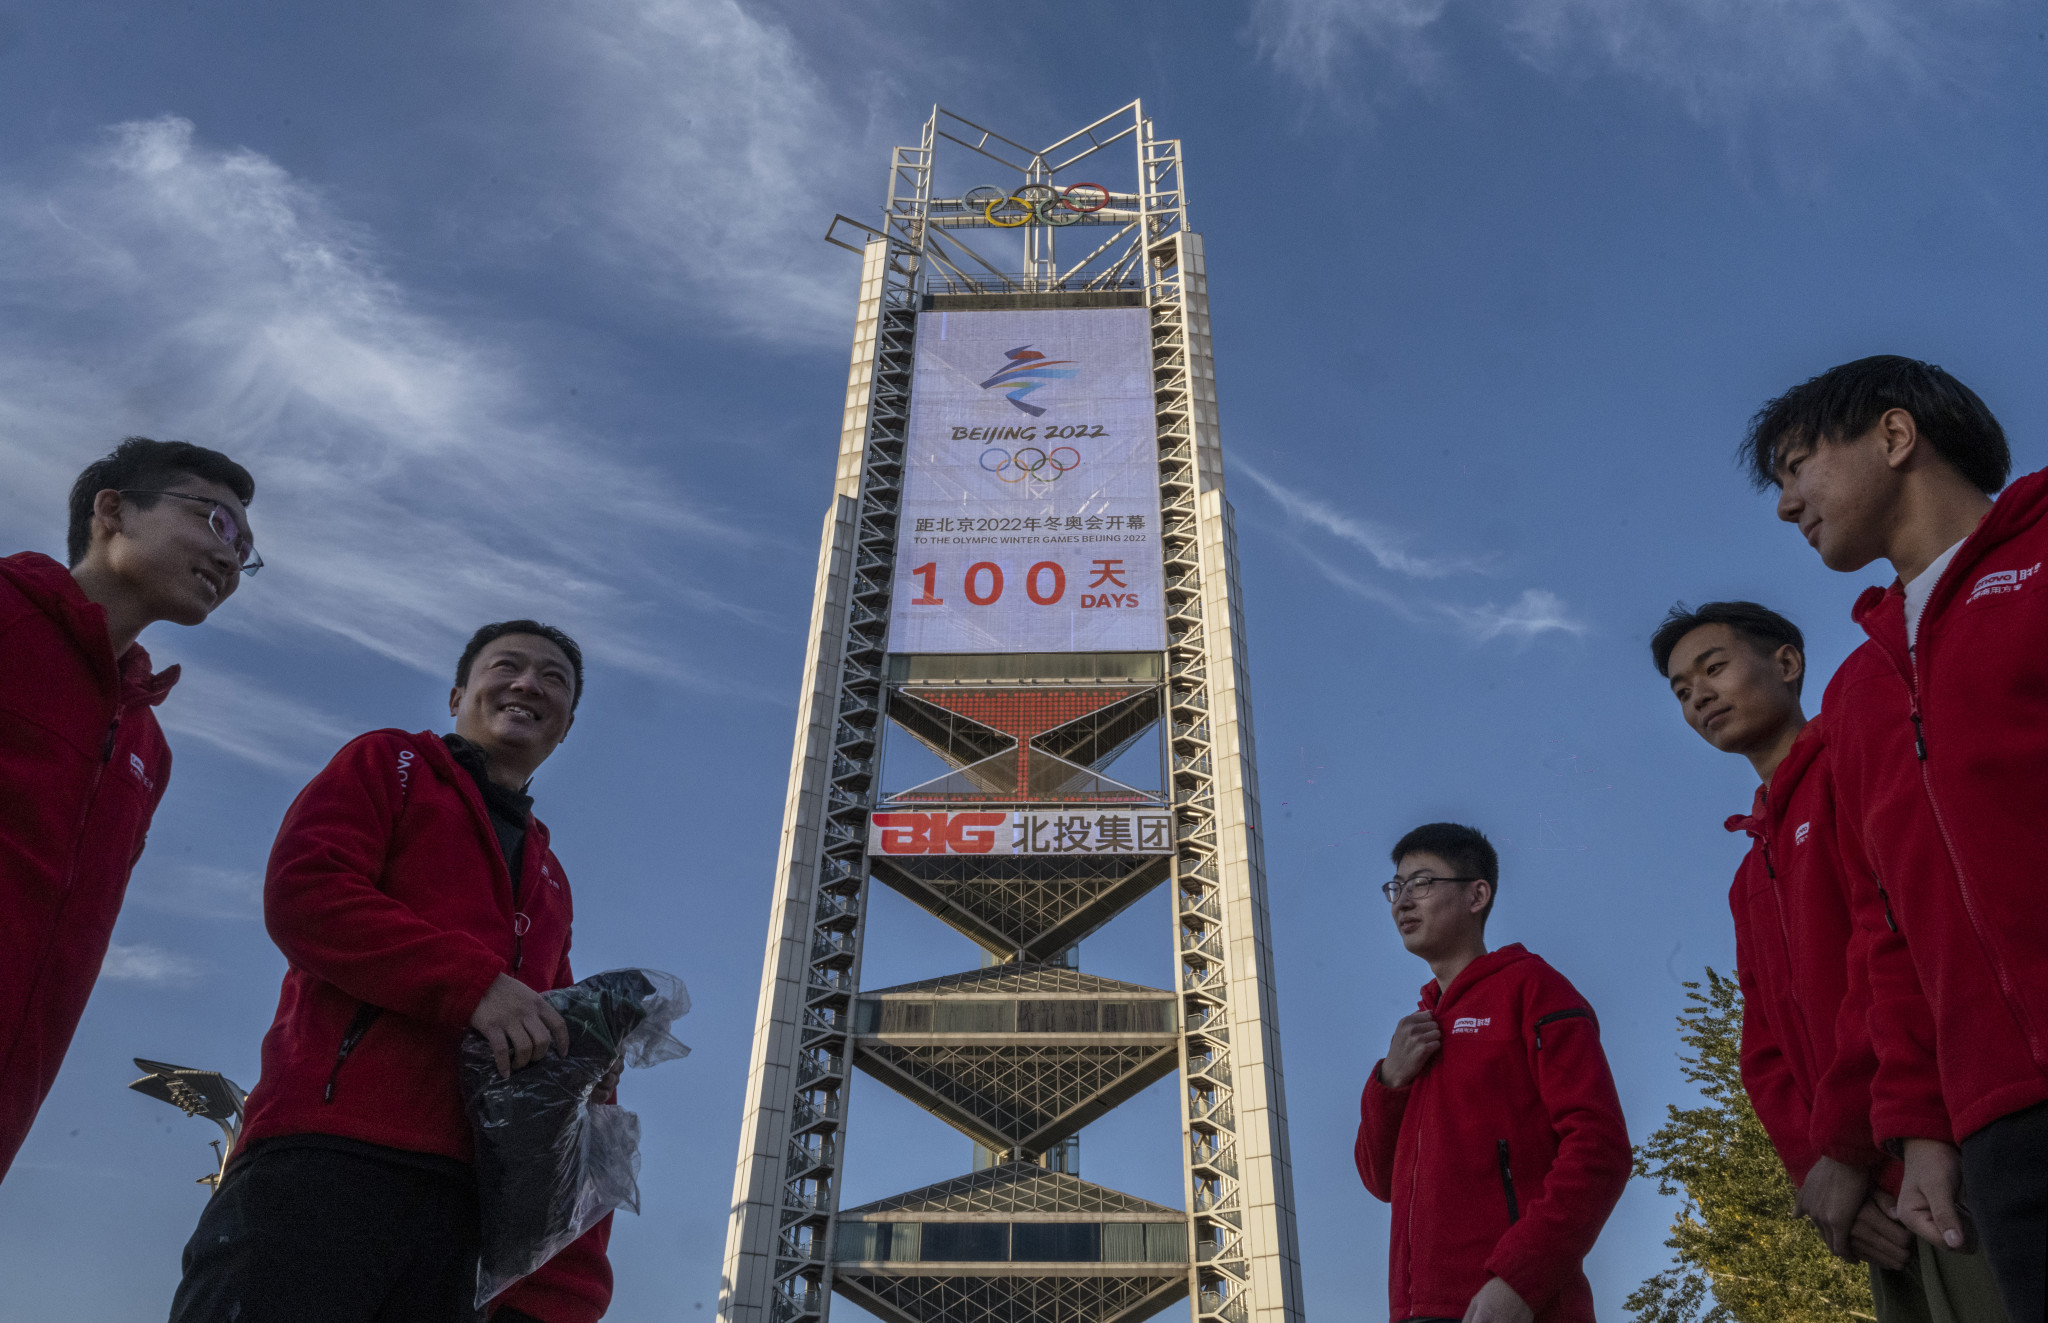 The 100 days to go countdown until Beijing 2022 was marked earlier this week ©Getty Images